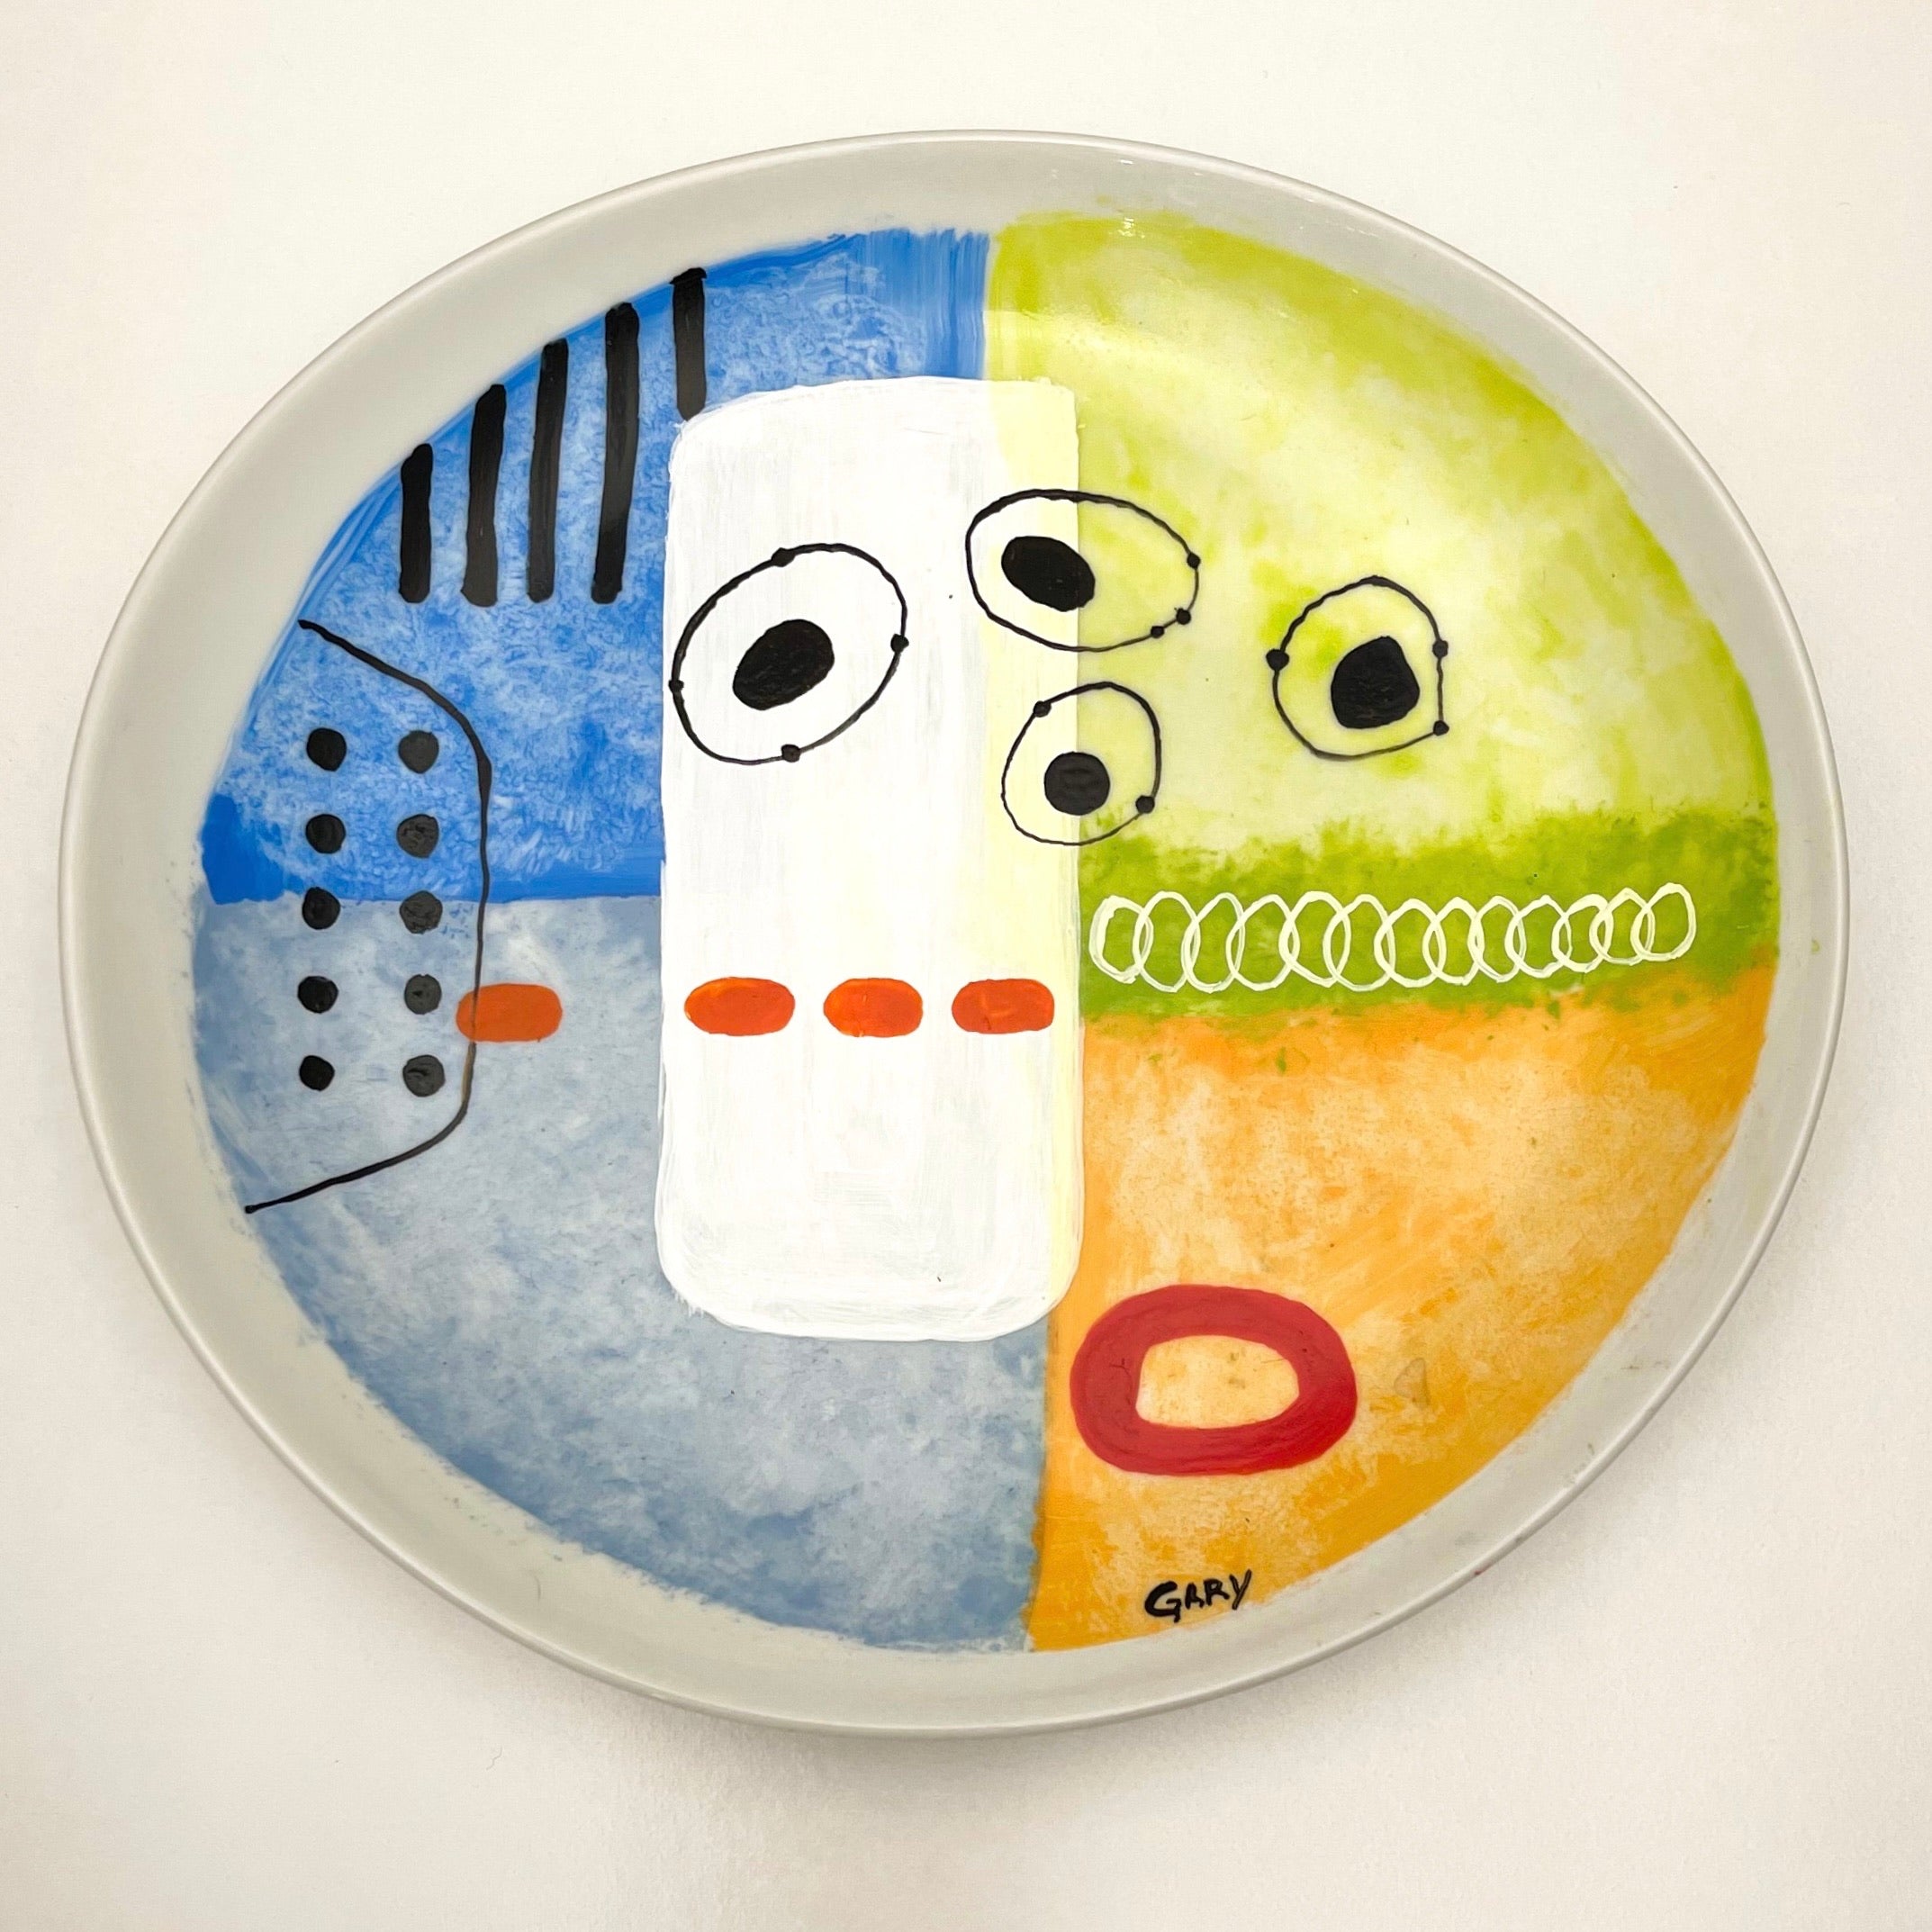 Painted Circle Plate Abstract Art 2